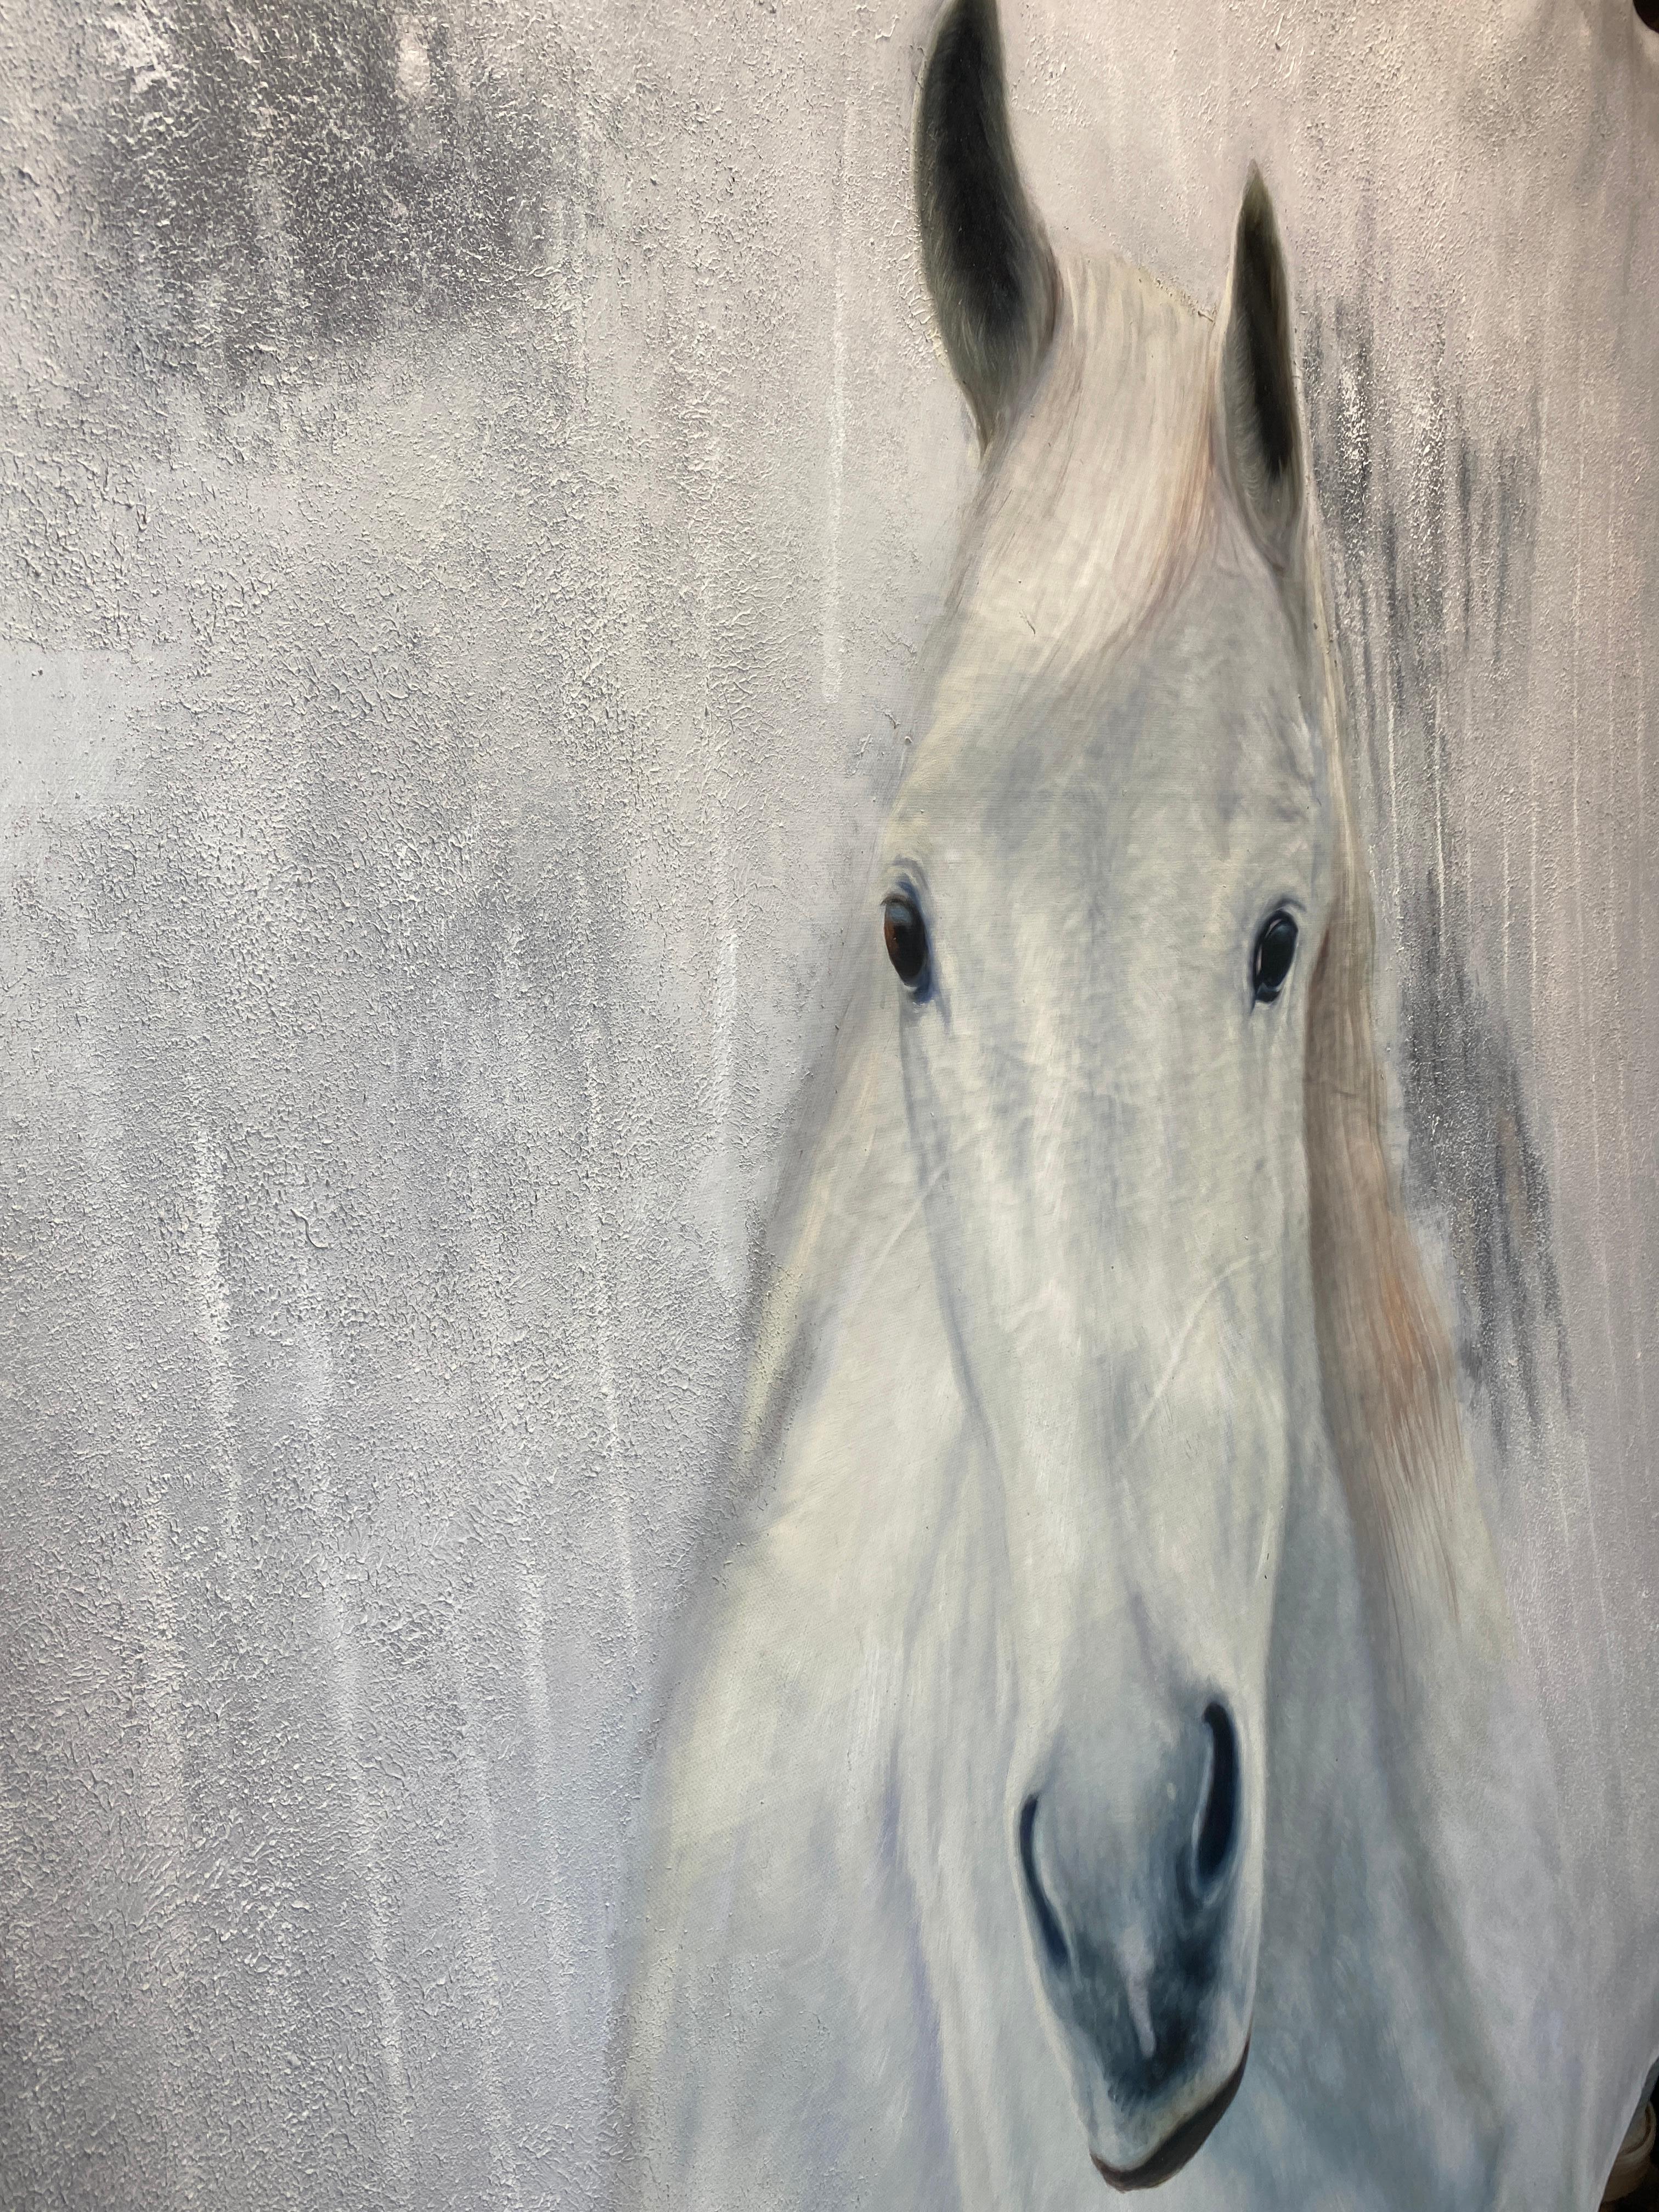 White Western Horse Oil Painting on Canvas 50Hx72W Horse Portrait Art - Gray Animal Painting by Irena Orlov